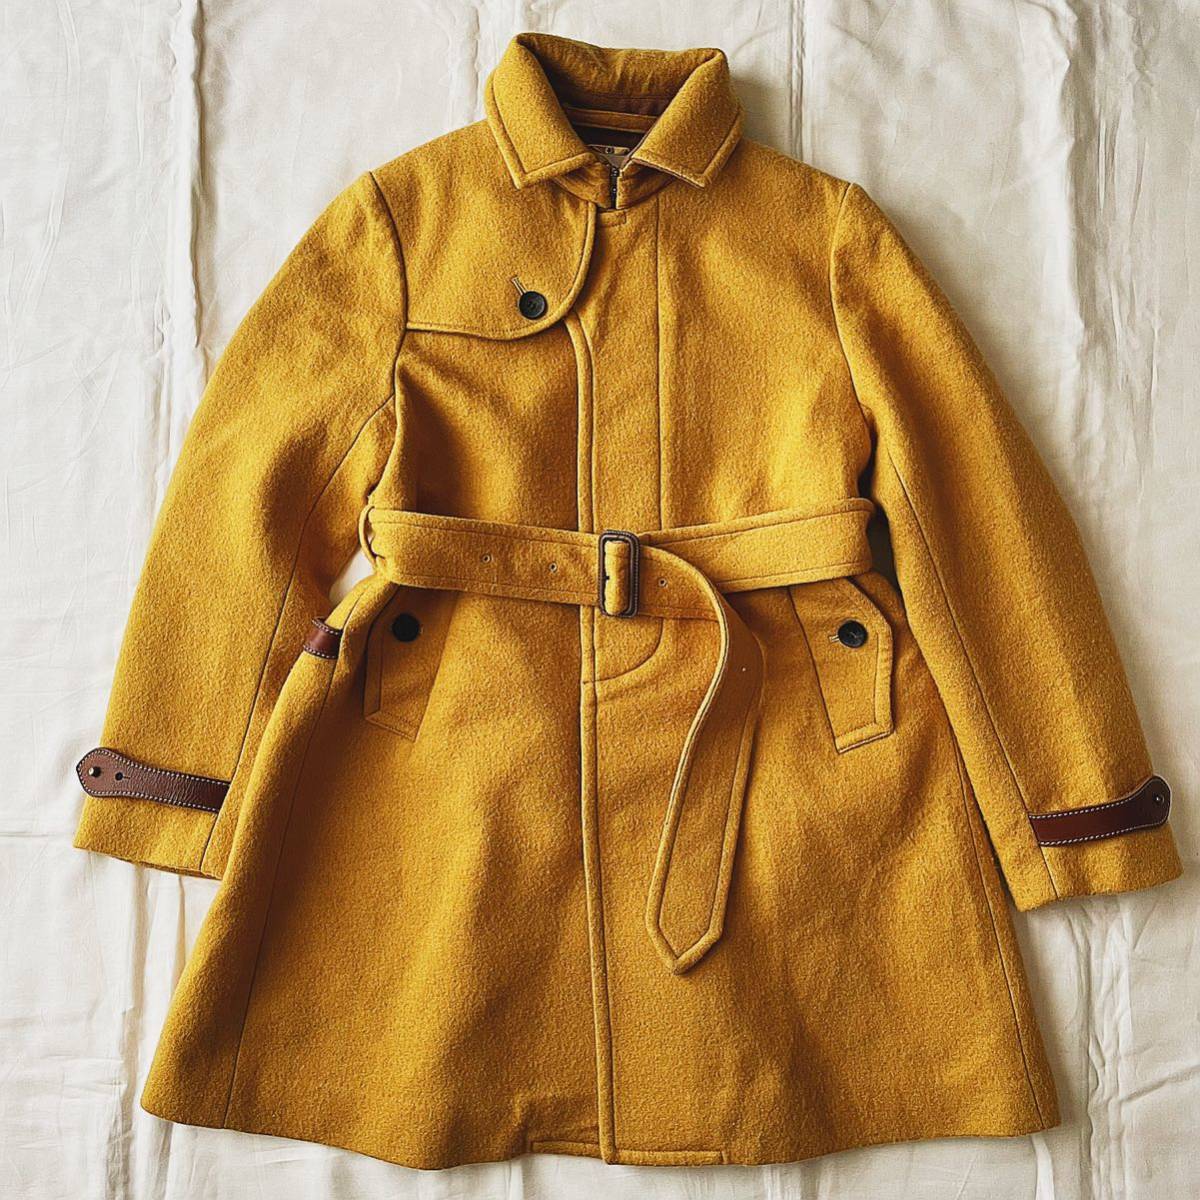  article limit ANALOG LIGTING analogue lighting lady's outer coat made in Japan yellow size S wool trench coat old clothes used